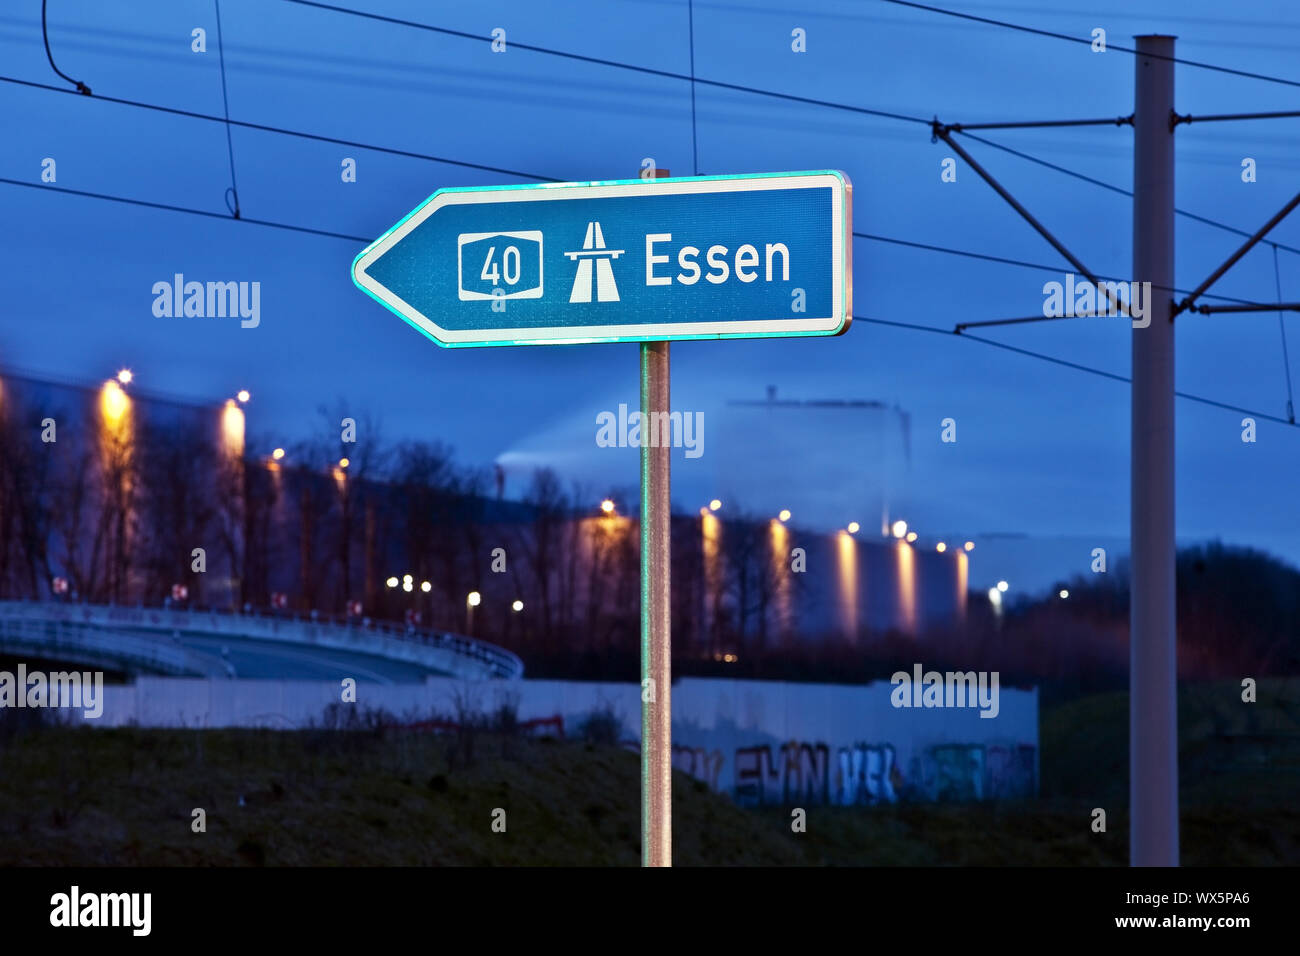 direction sign to Essen on the motorway A40 in the evening, Bochum, Ruhr Area, Germany, Europe Stock Photo